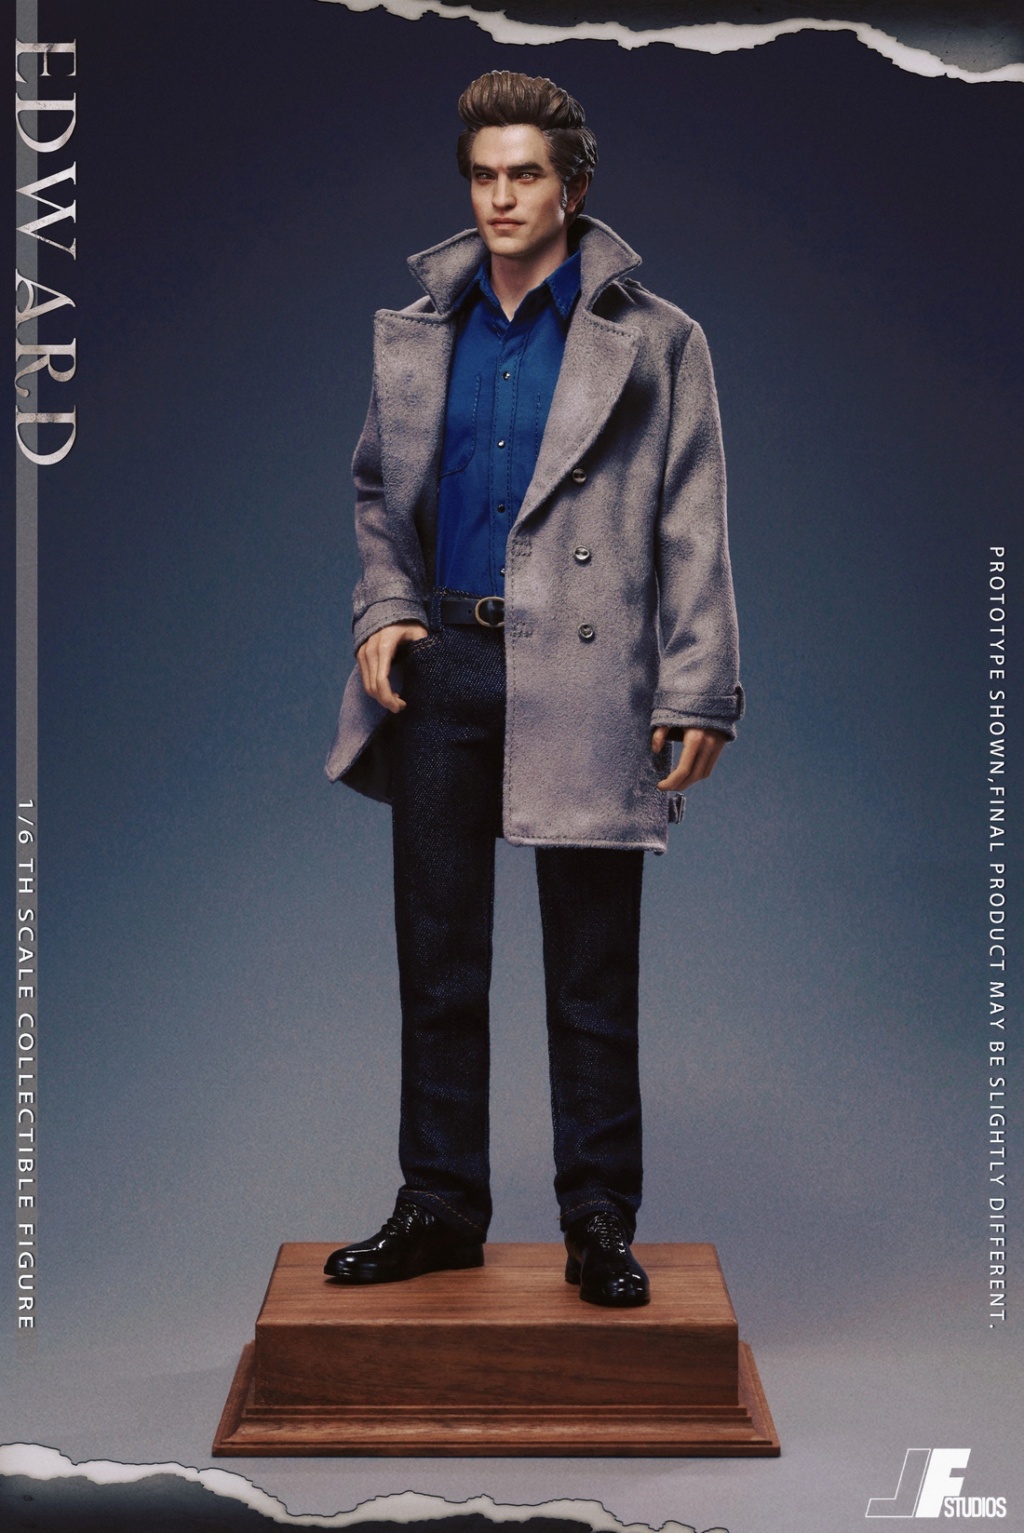 NEW PRODUCT: JF STUFIOS: Children of Twilight Series A "Edward" 1/6 Action Figure 16305110